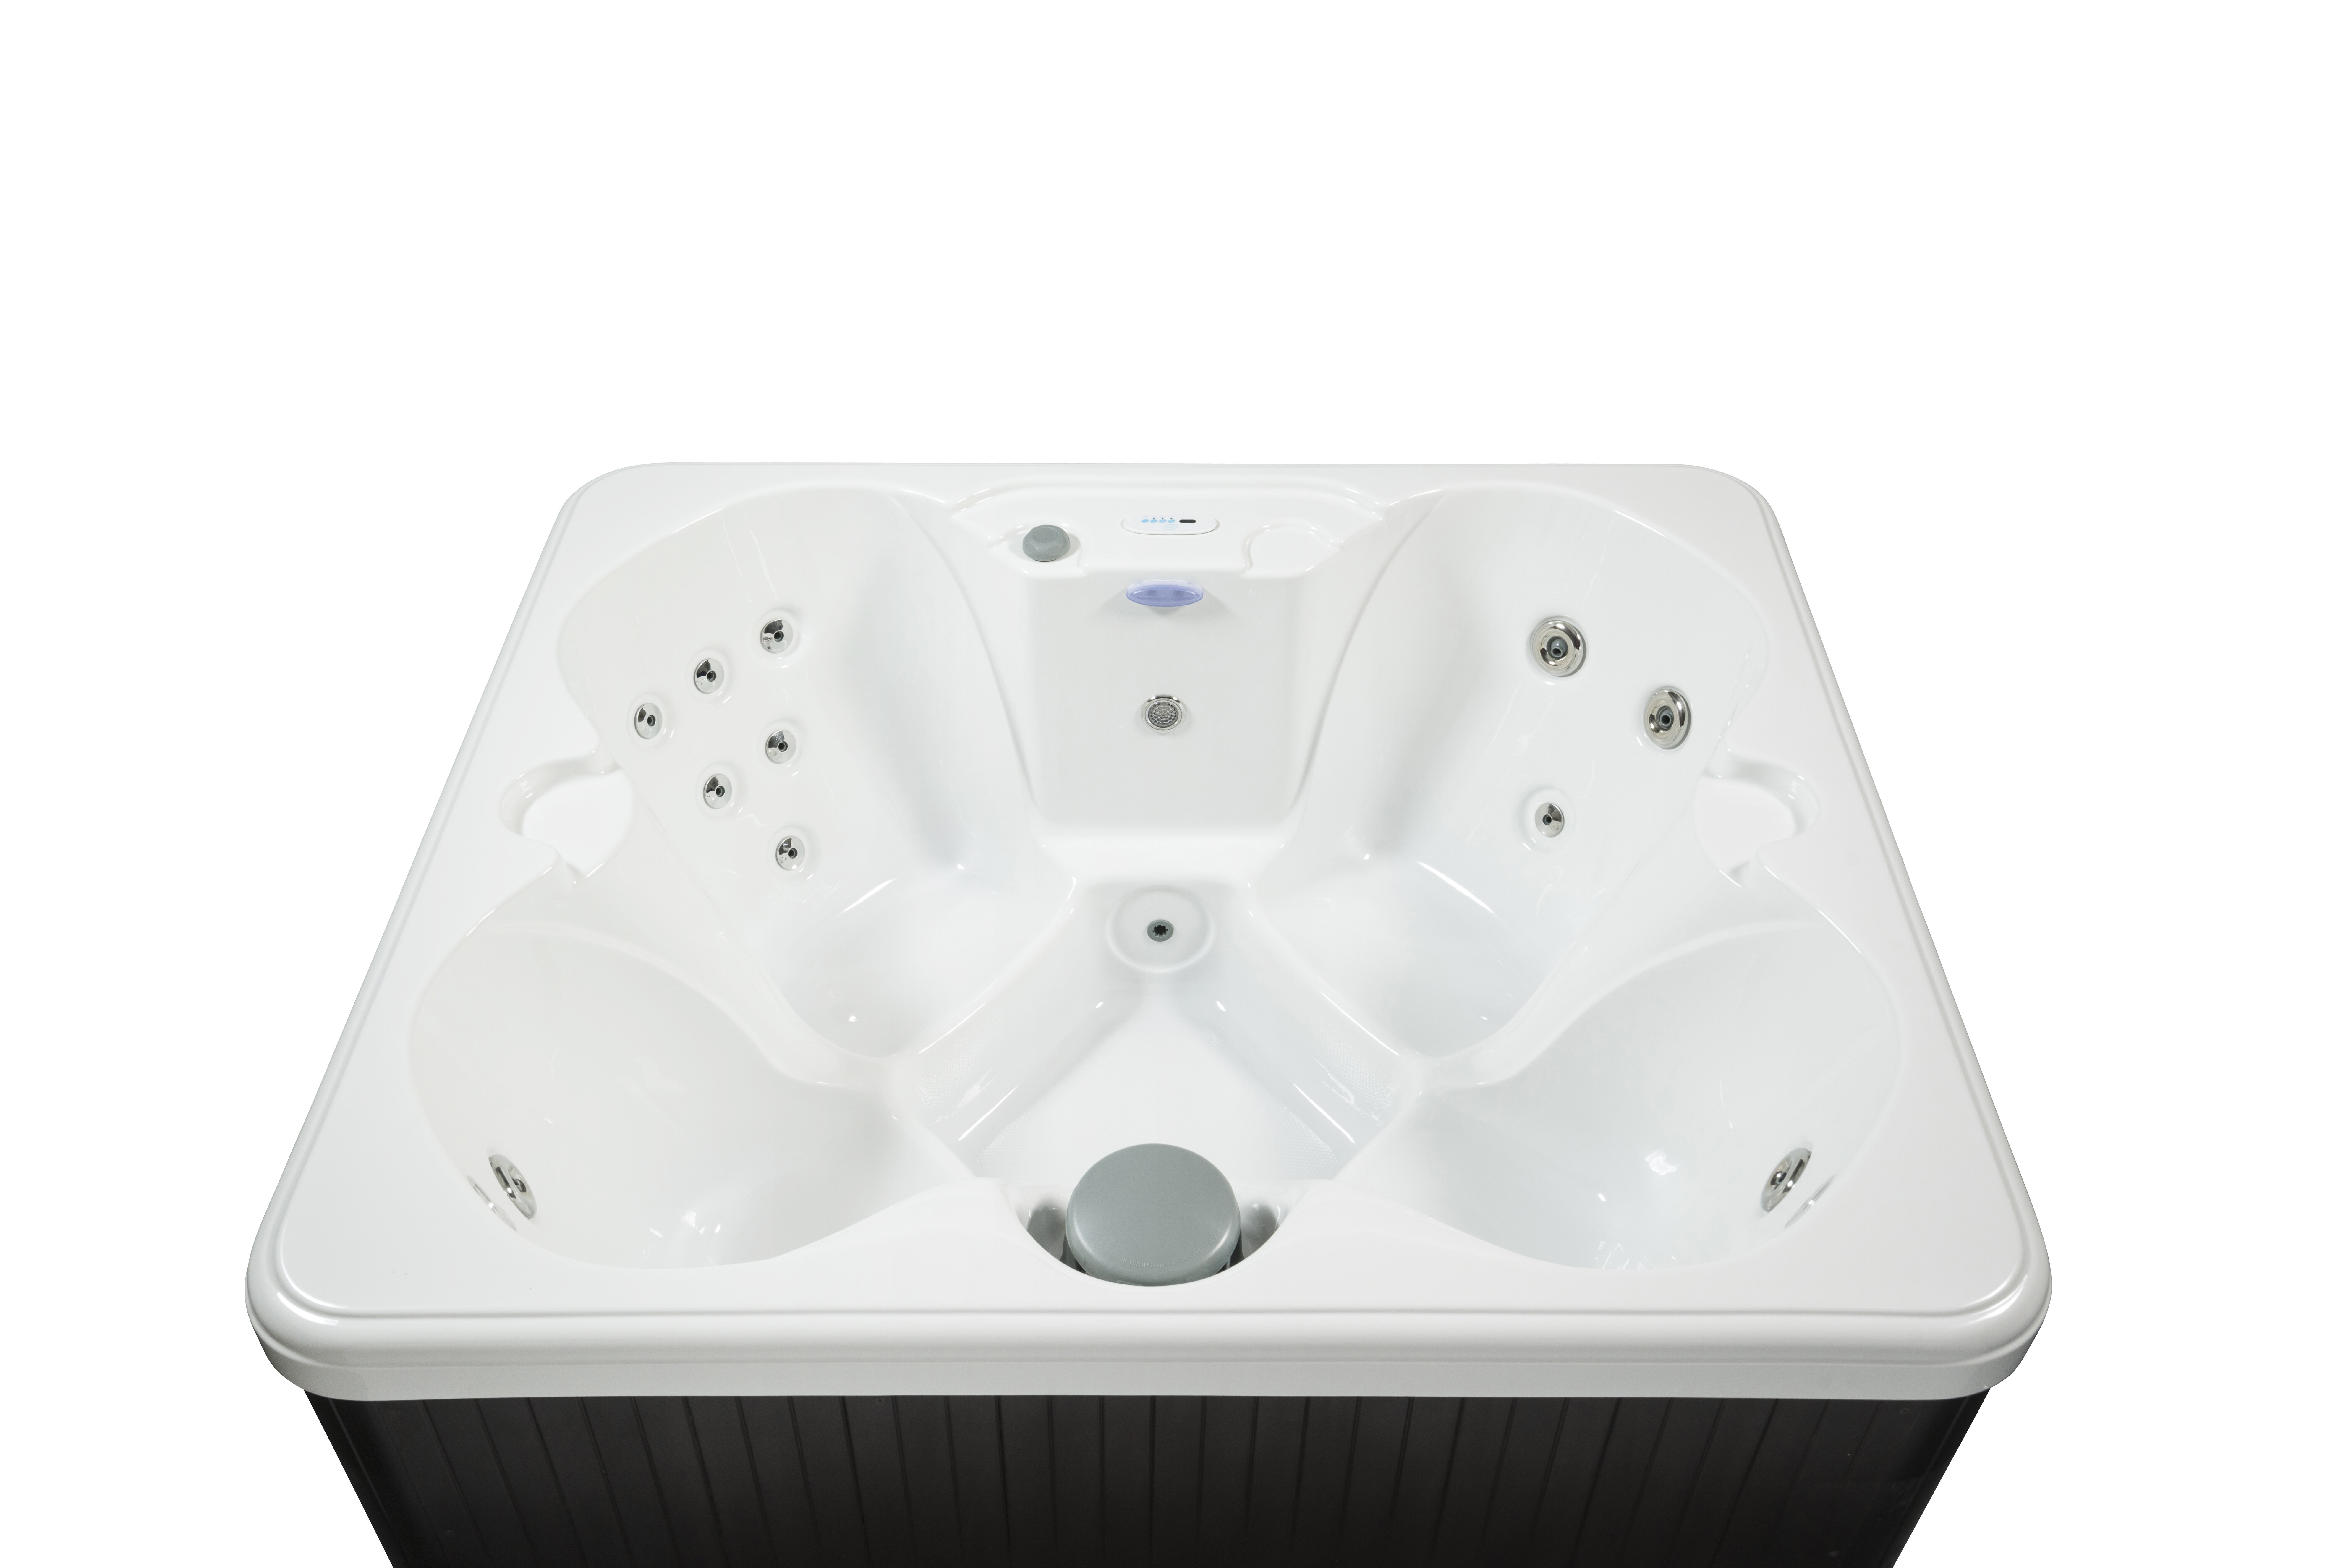 Hudson Bay 3 Person 14 Jet Spa with Stainless Jets and 110V GFCI Cord Included. 